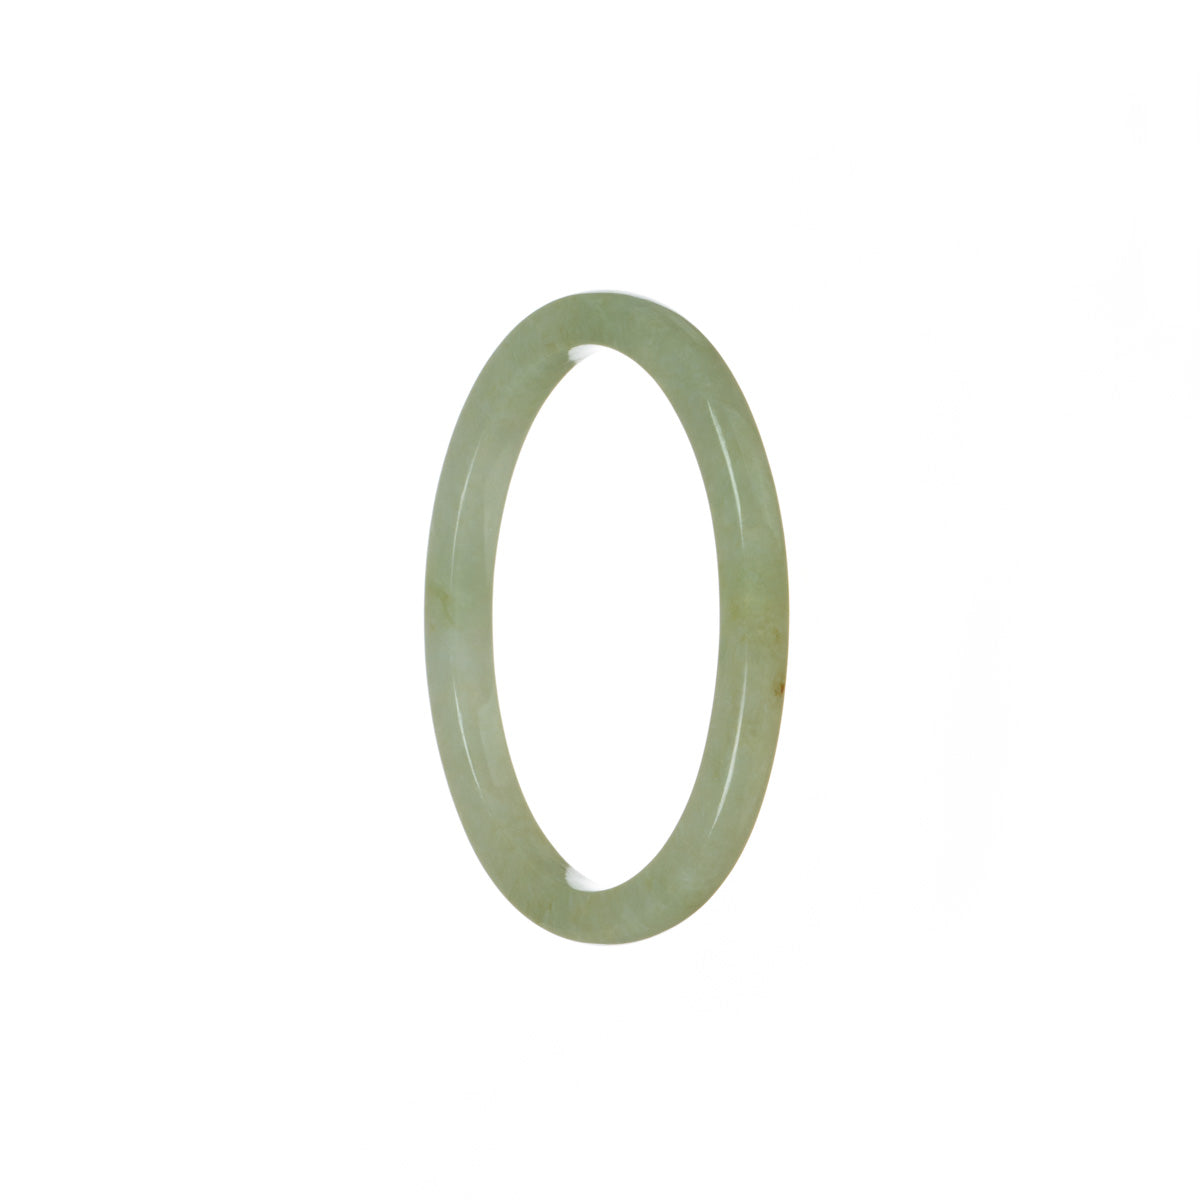 A pale green traditional jade bracelet with an oval shape, measuring 52mm.